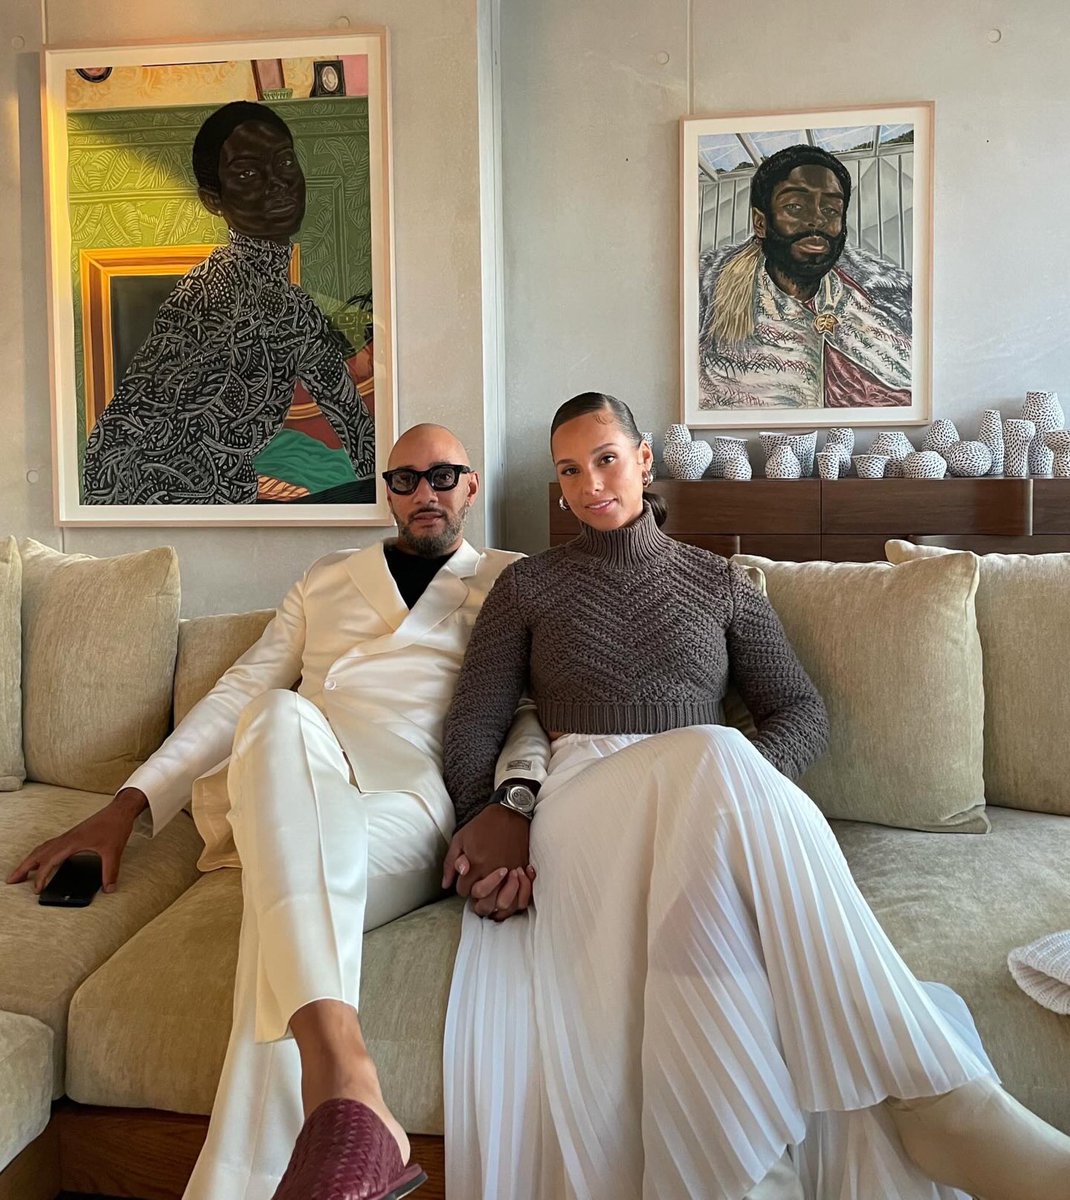 Alicia Keys & Swizz Beatz bring BLACK ART to BK 🖼️ GIANTS: Art from the Dean Collection. Opening Feb. 10 @brooklynmuseum The power couple is feeding the community with pieces from their collection, by Black artists. TIX: brooklynmuseum.org/exhibitions/gi… #GiantsBkM #lipglossnhotsauce